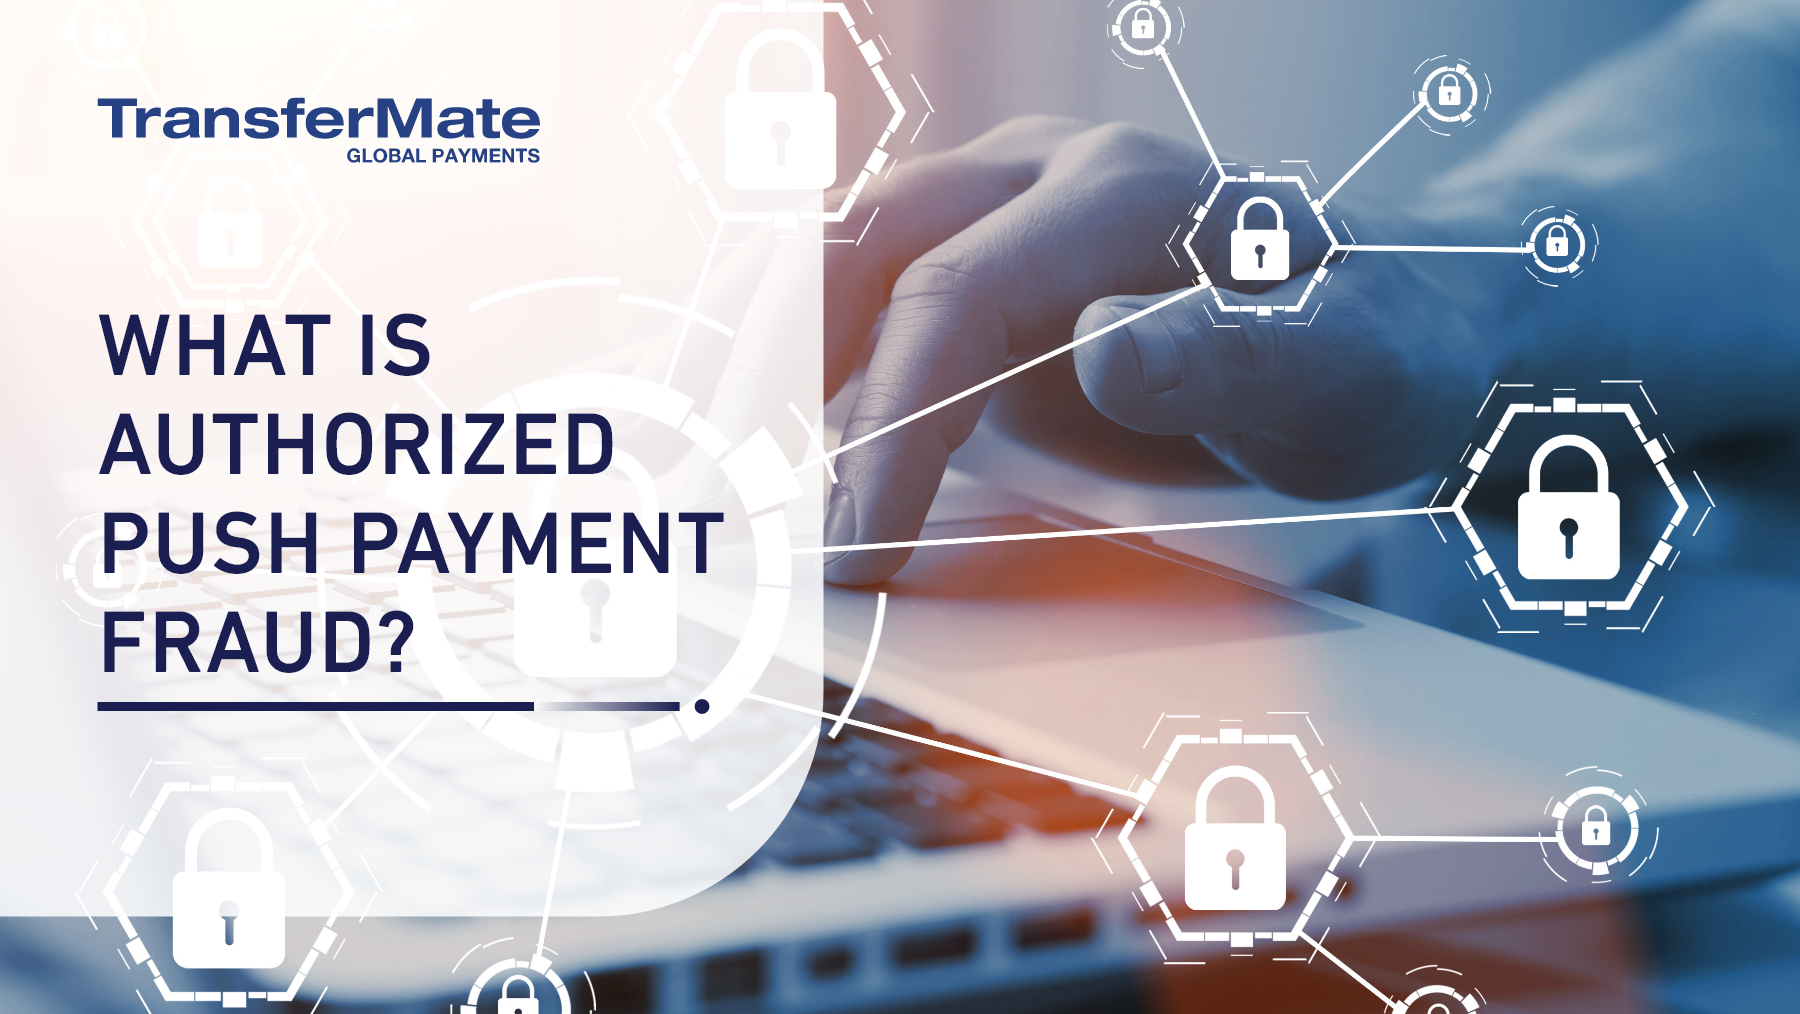 What is Authorized Push Payment Fraud and how do you prevent it?